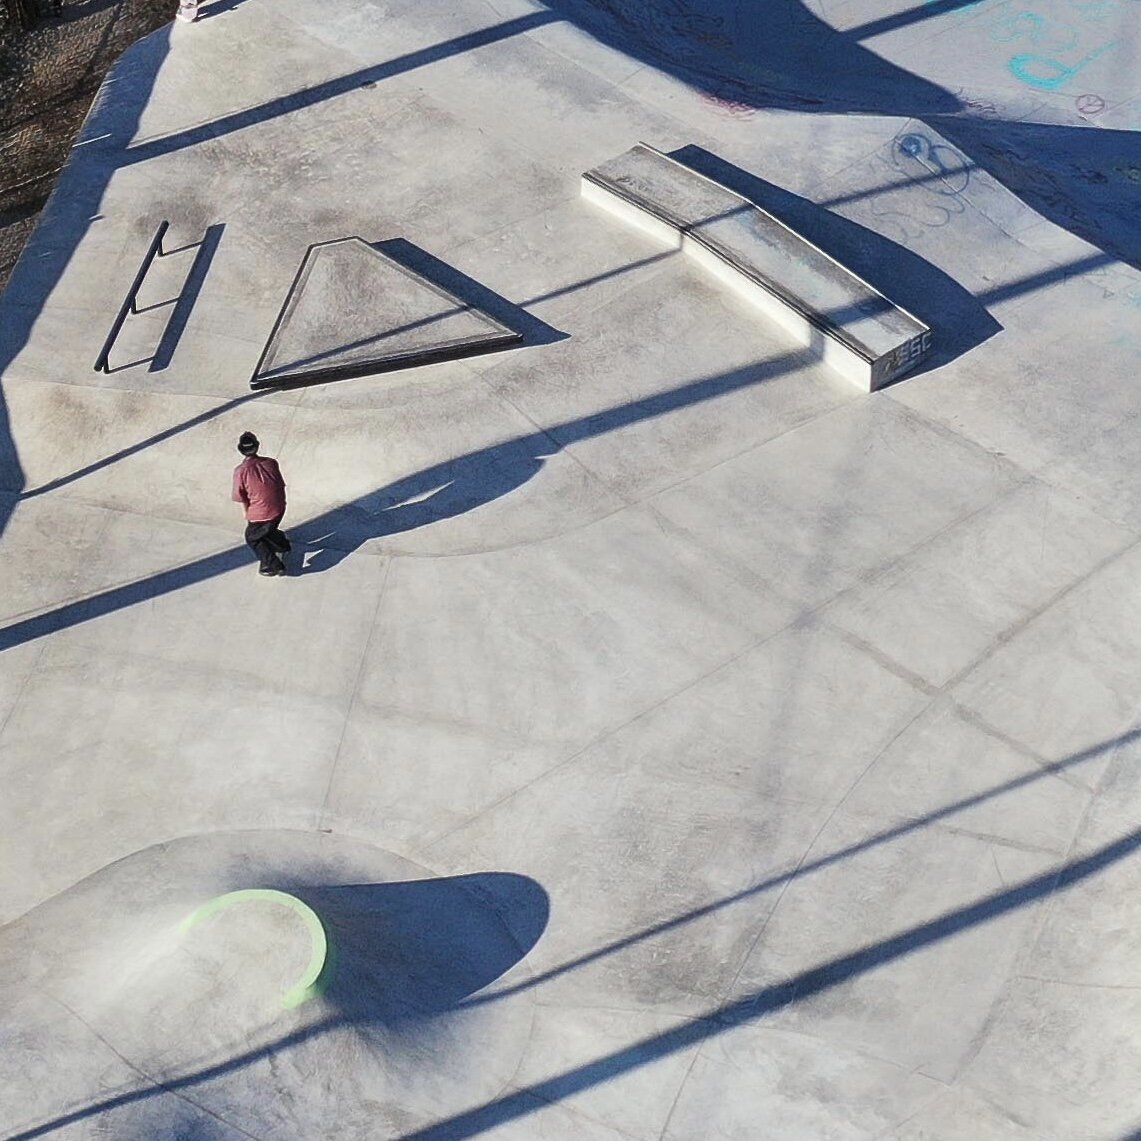 Our addition to #scottcarpenterskatepark in Boulder, Colorado added some fun new obstacles &amp; flow ✅✅✅